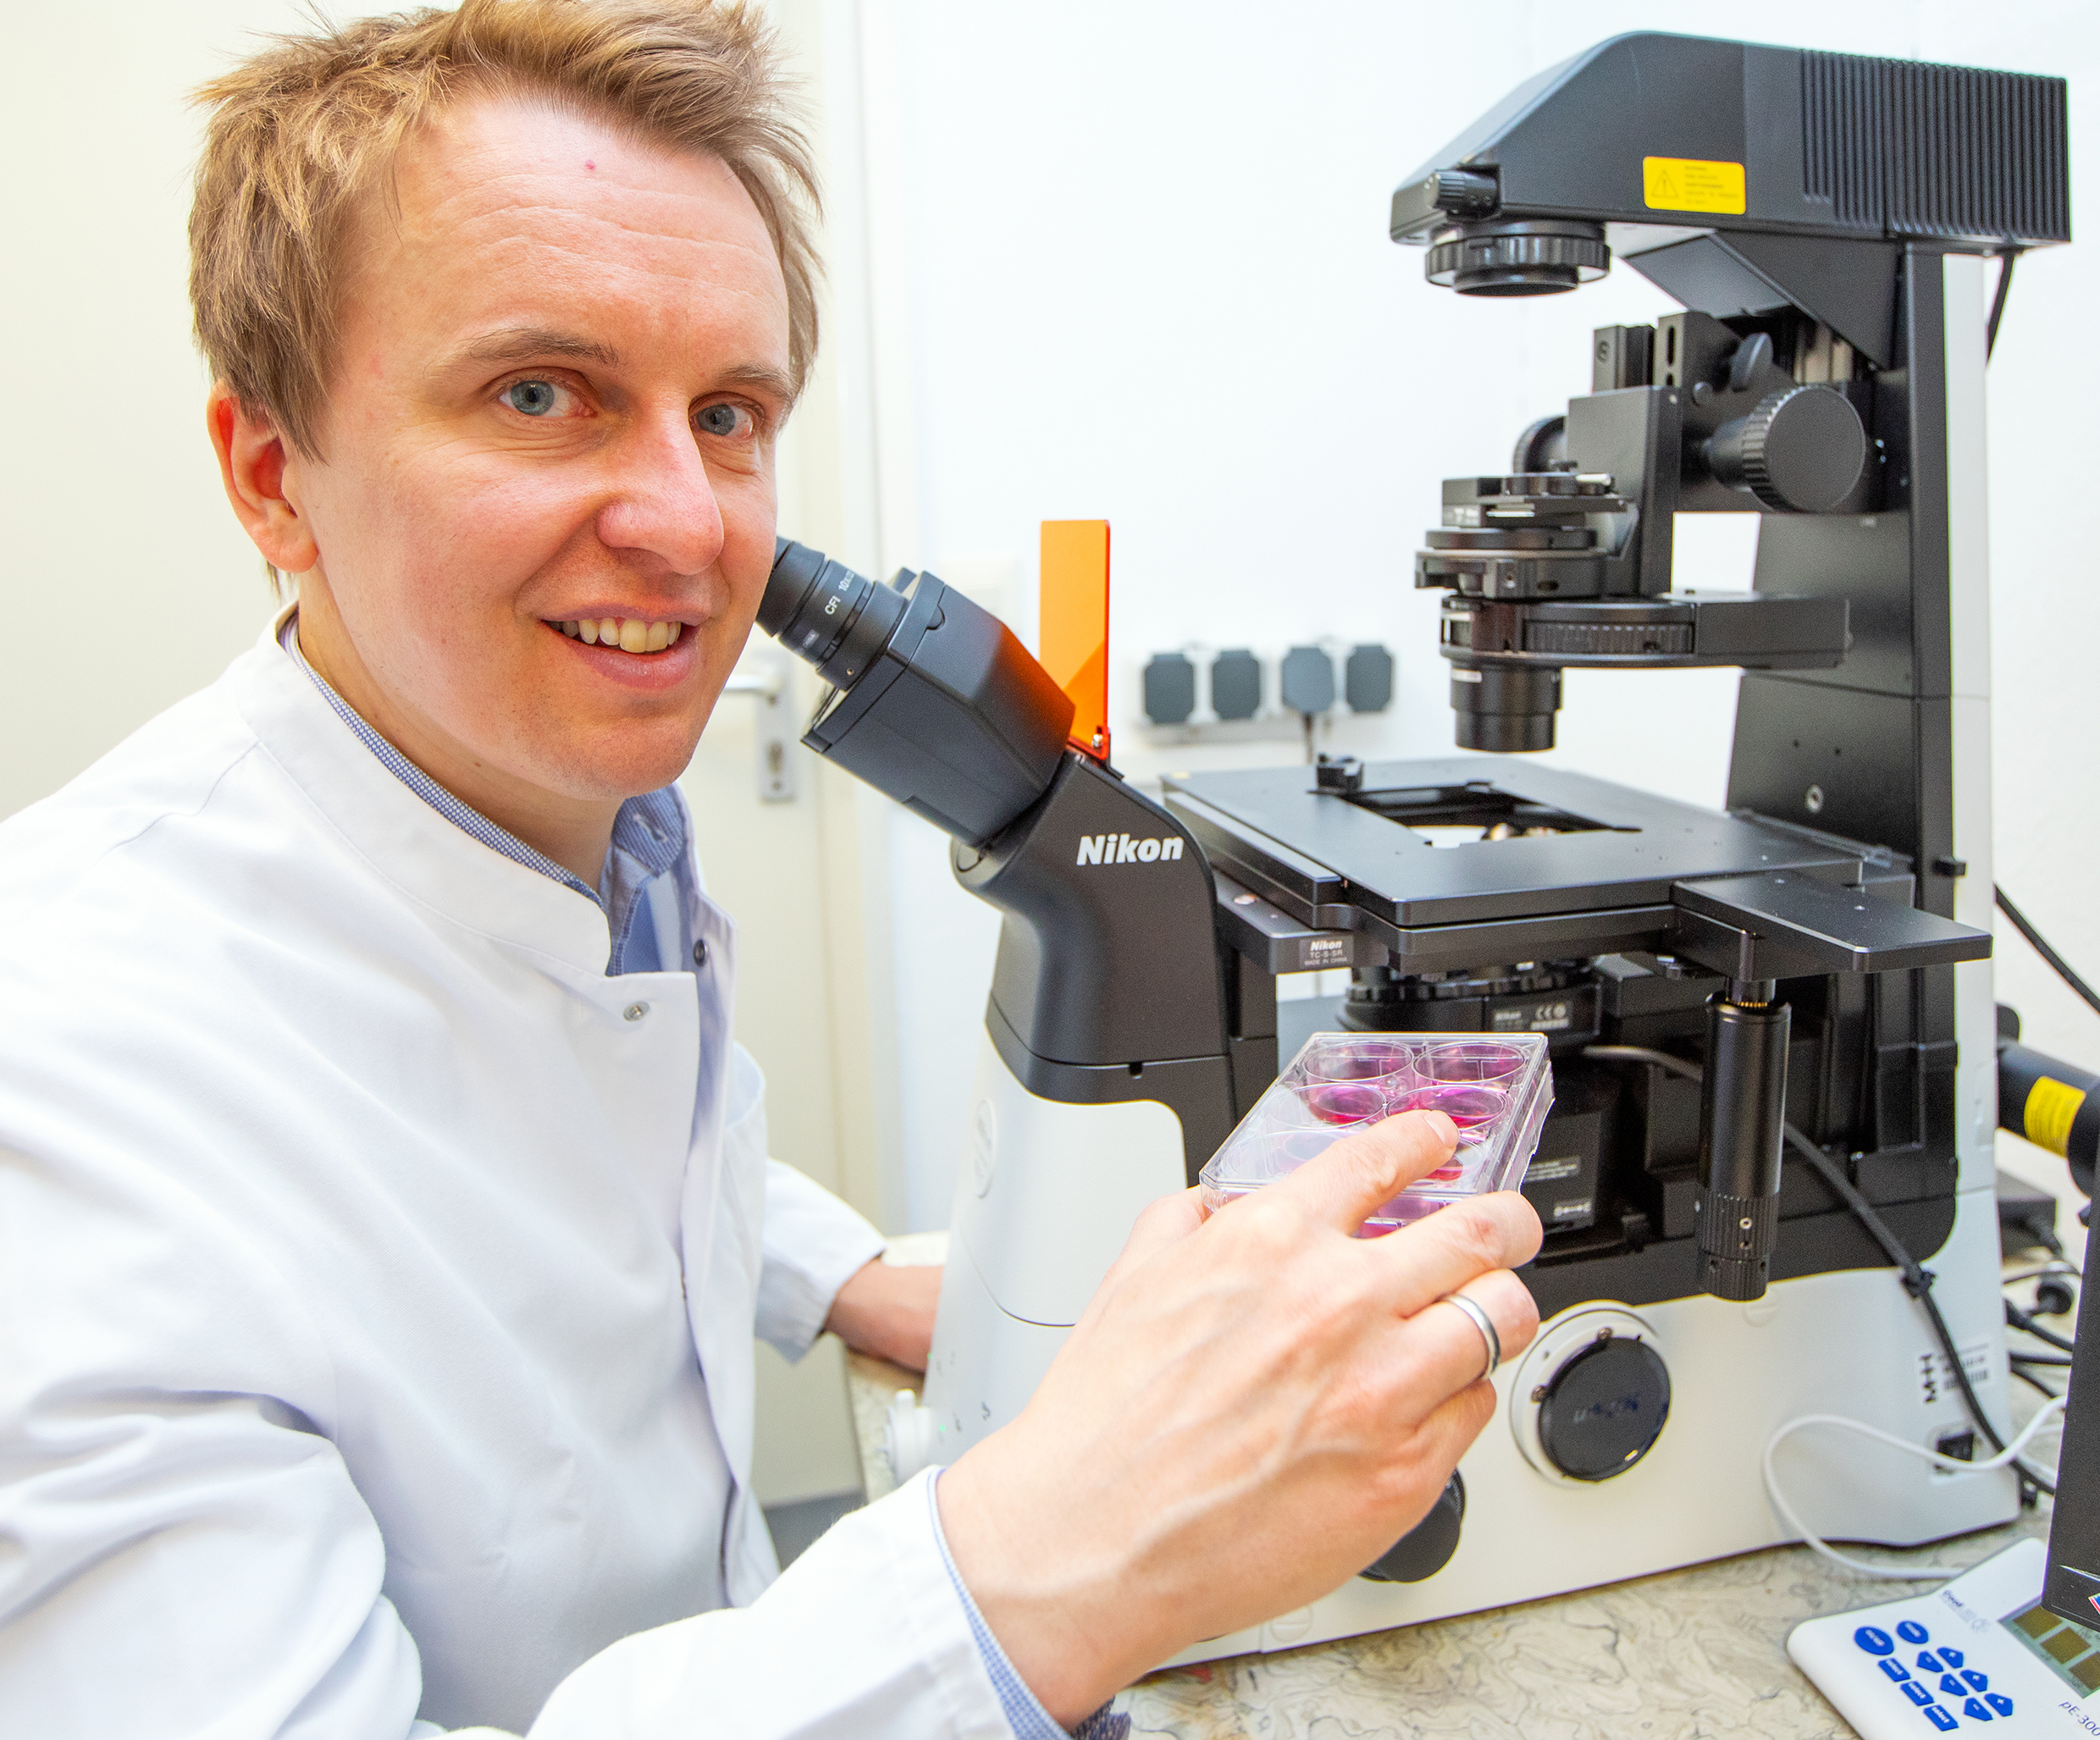 Professor Dr Ingmar Mederacke sits in front of a fluorescence microscope and holds a cell culture plate with stained liver stellate cells.